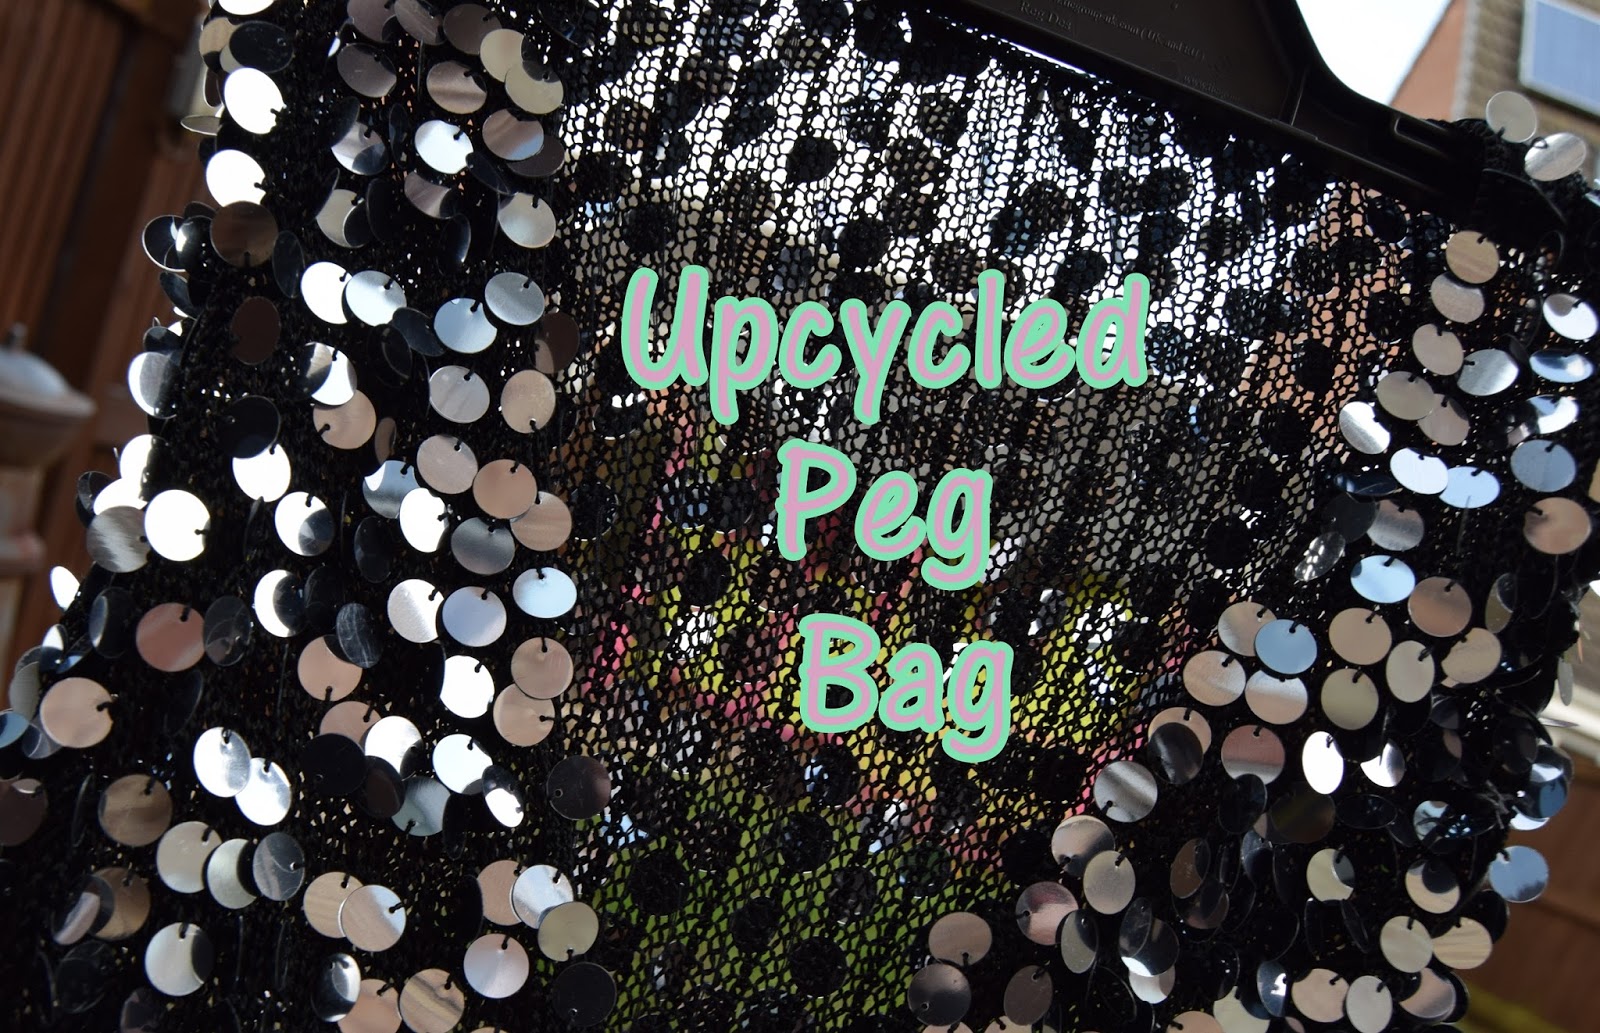 Upcycled Sparkly Peg Bag: Recycling And Reusing